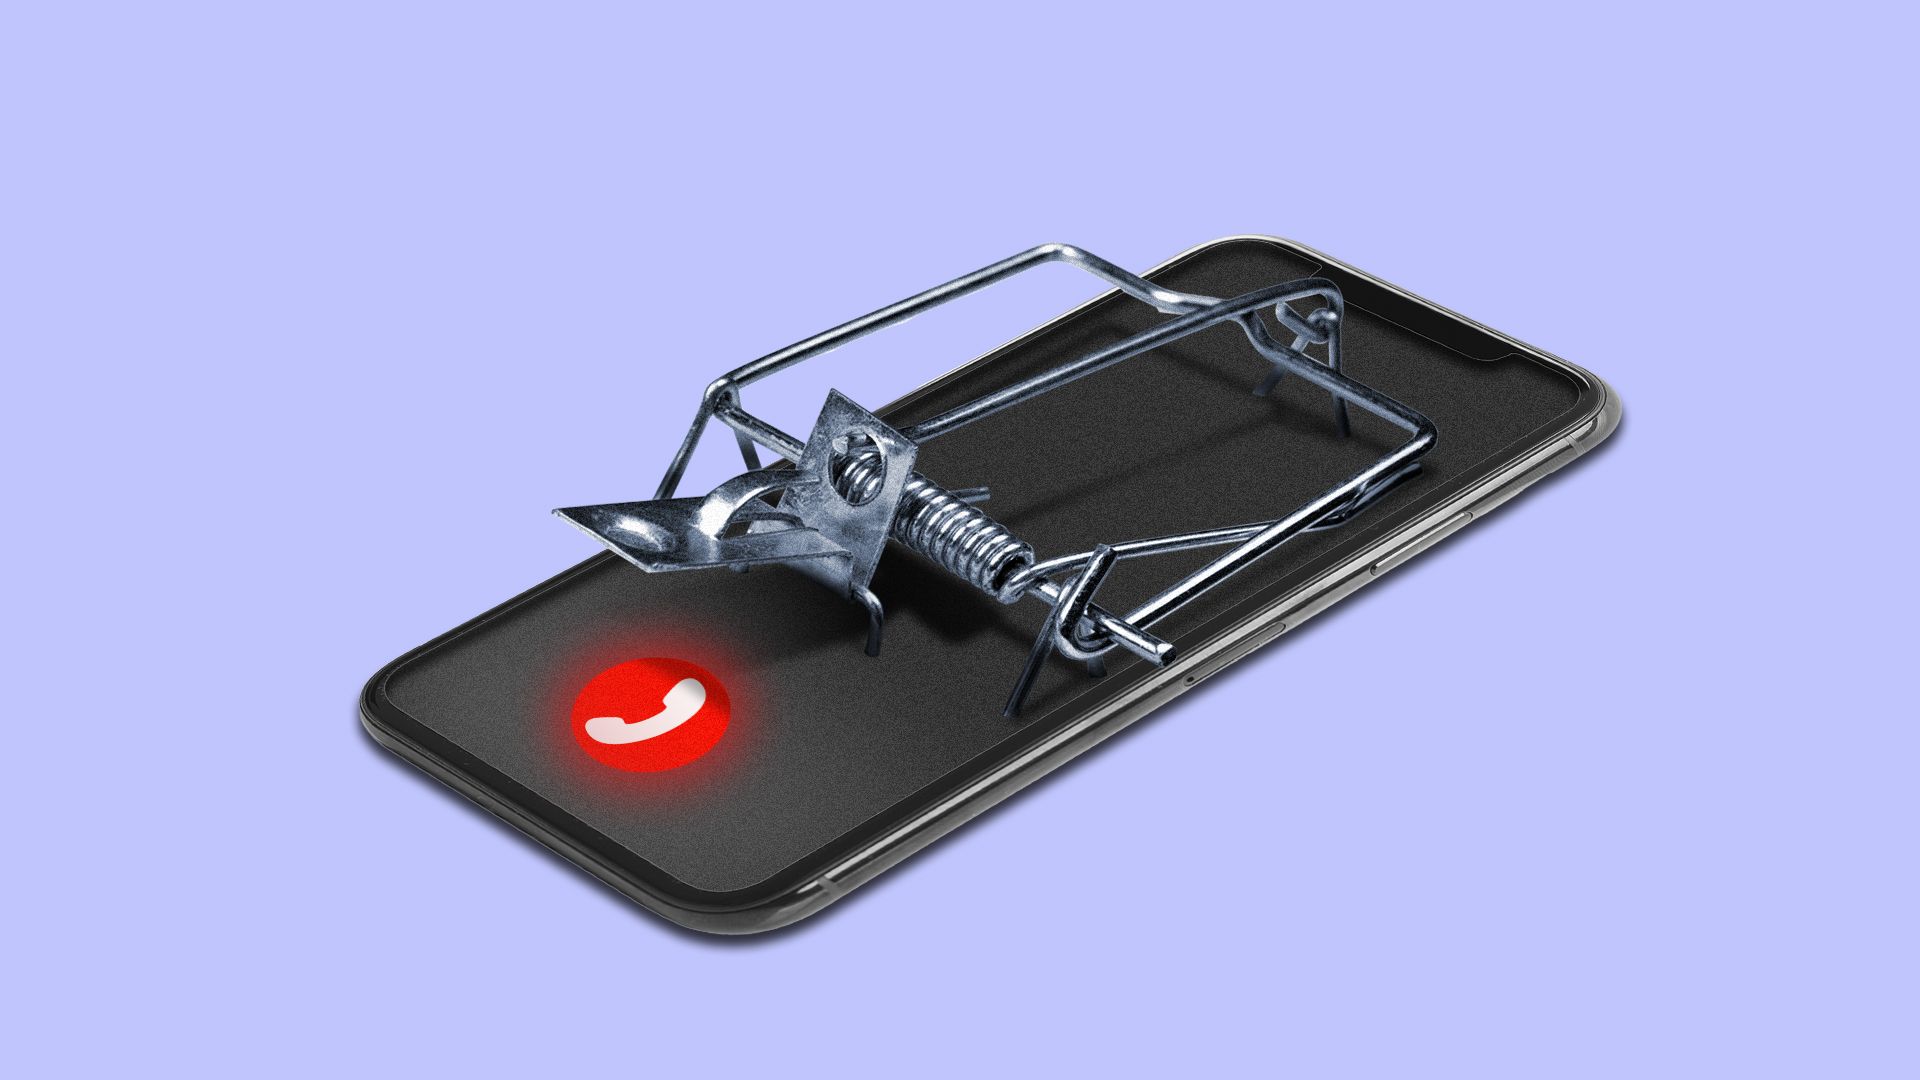 Illustration of a cellphone as a mousetrap